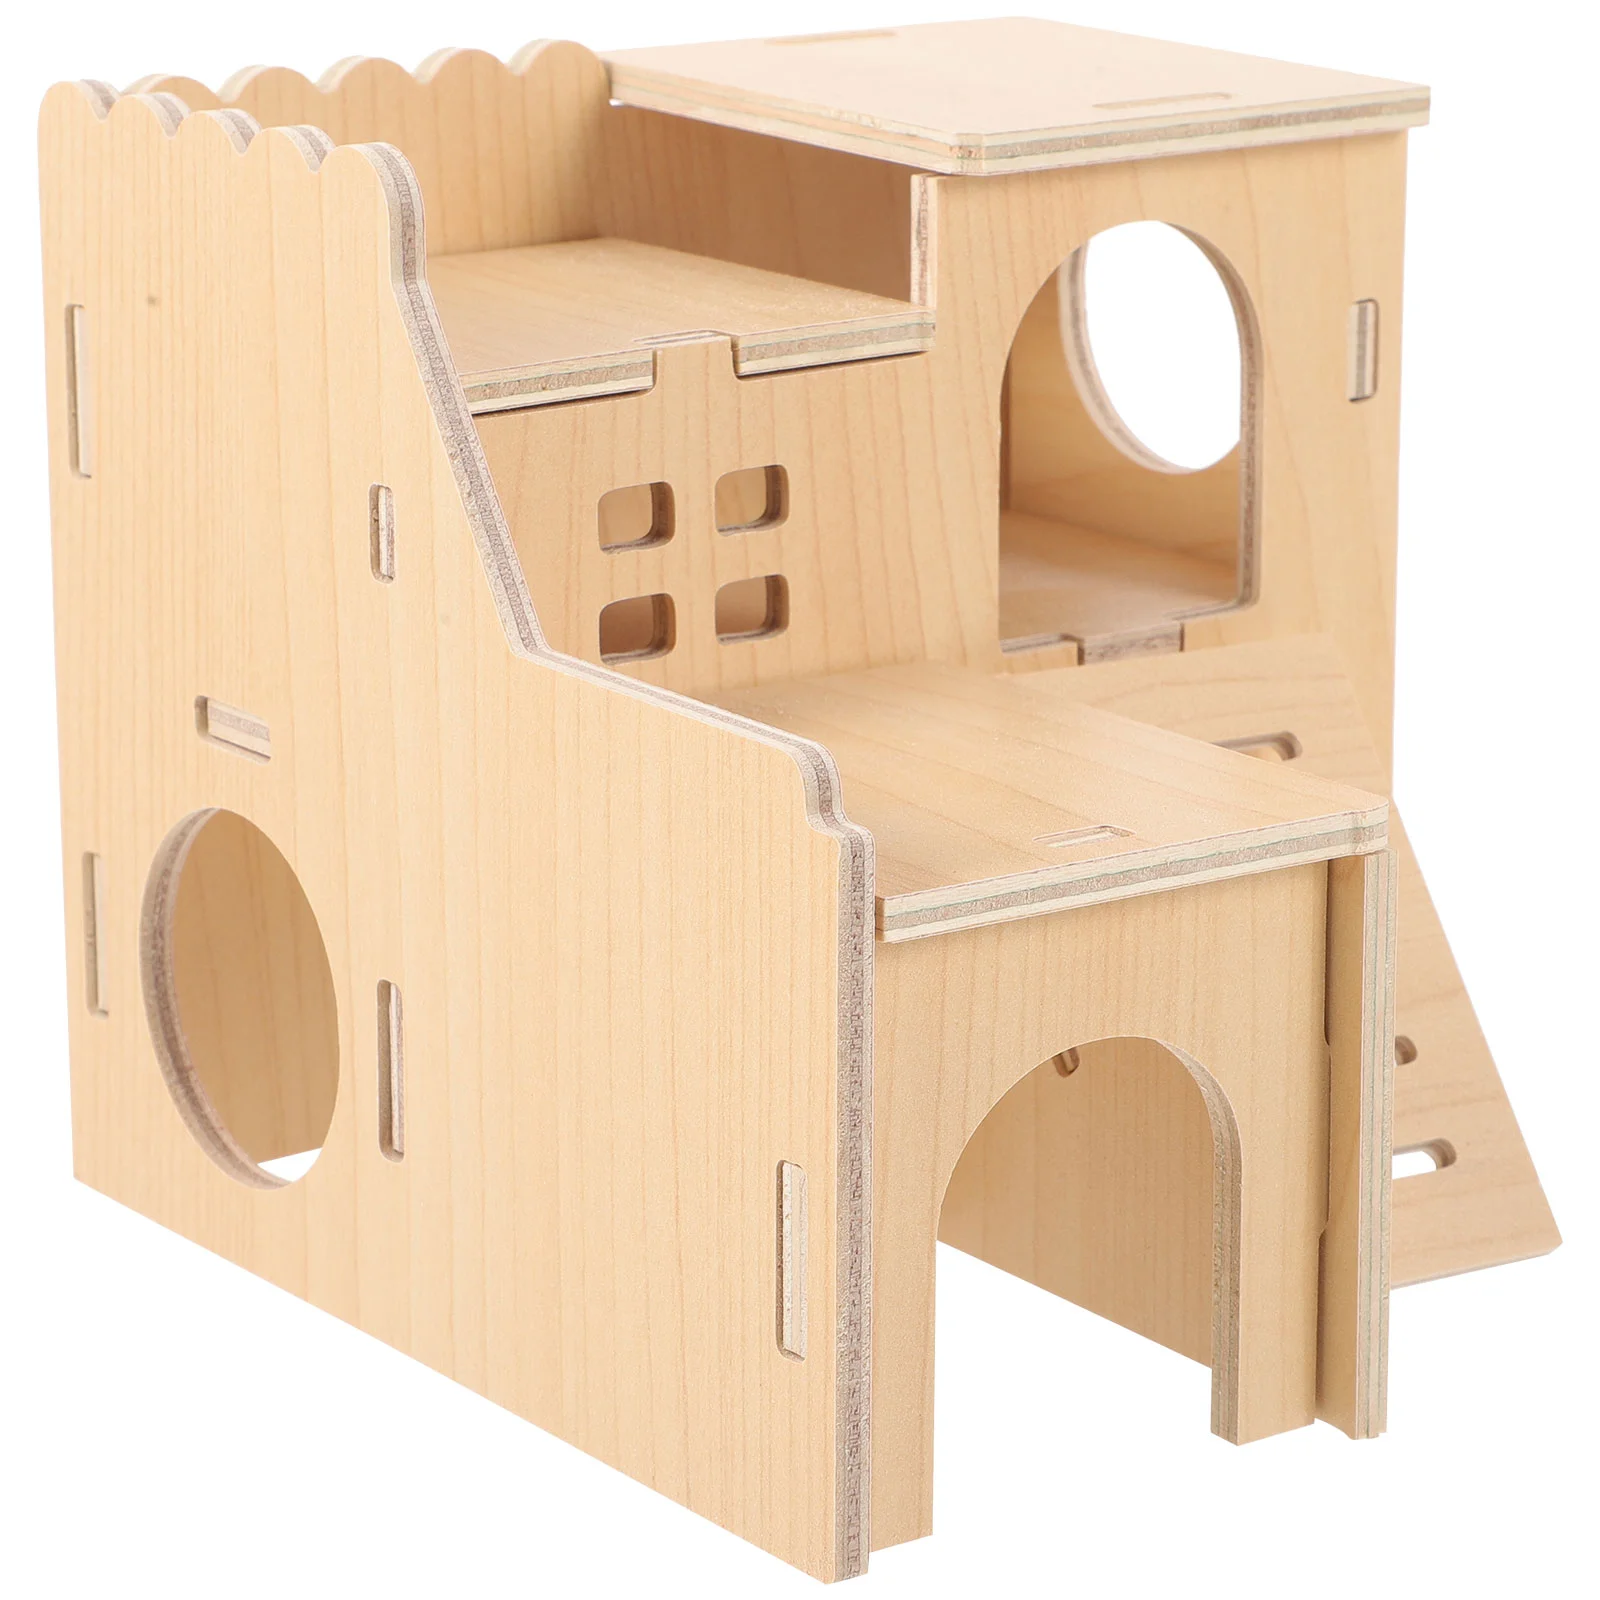 

Hamster Hideout Small Rats Hamster House Rat Cage Accessory Tiny House Hamster Playground for Hamster Small Animals Decor Cage